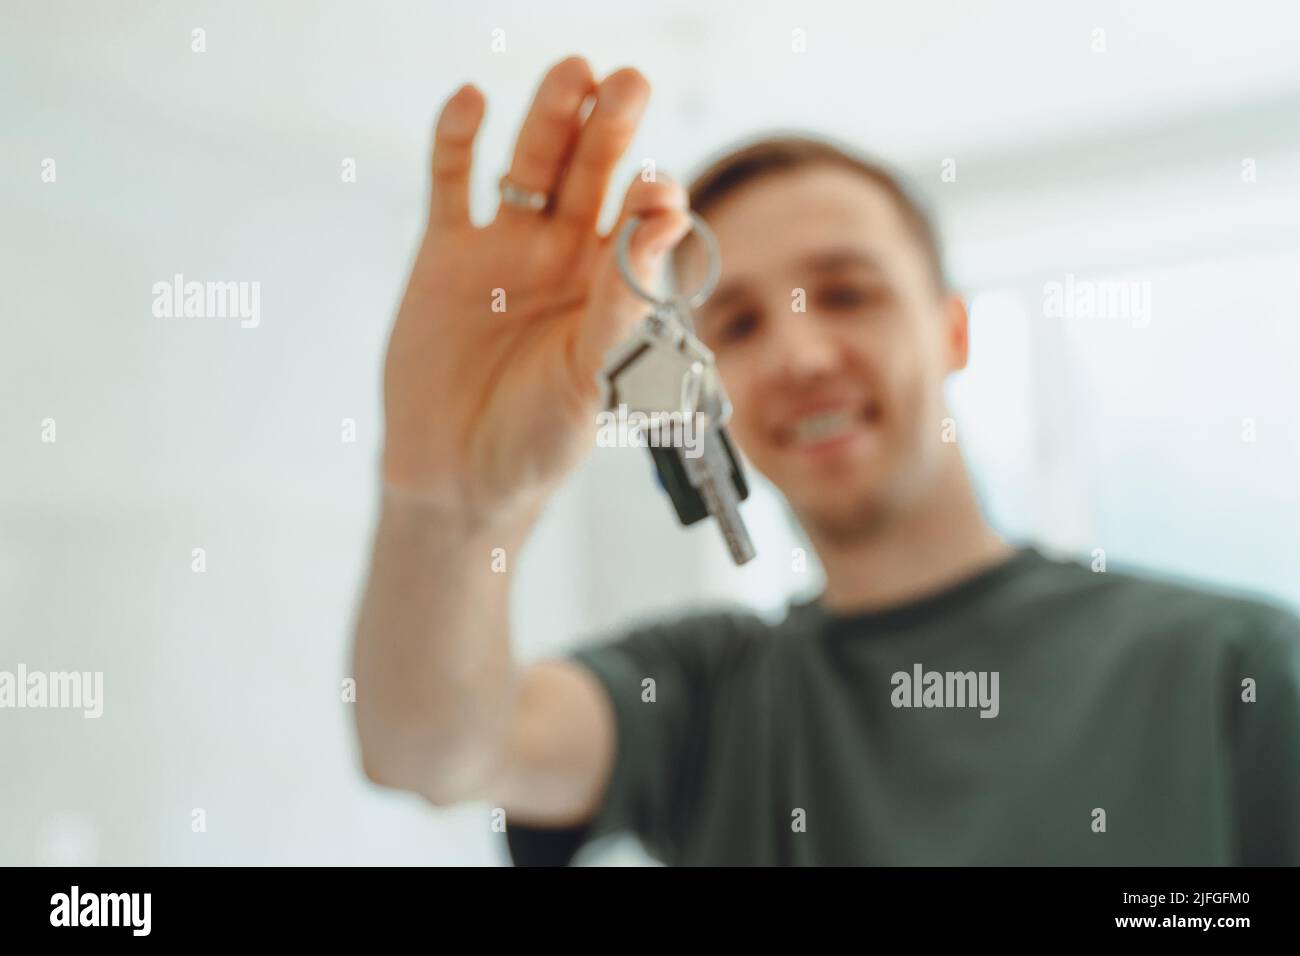 Satisfied homeowner. portrait of happy young man buyer renter of new modern home apartment holding key dwelling demonstrating wellbeing wealth celebra Stock Photo